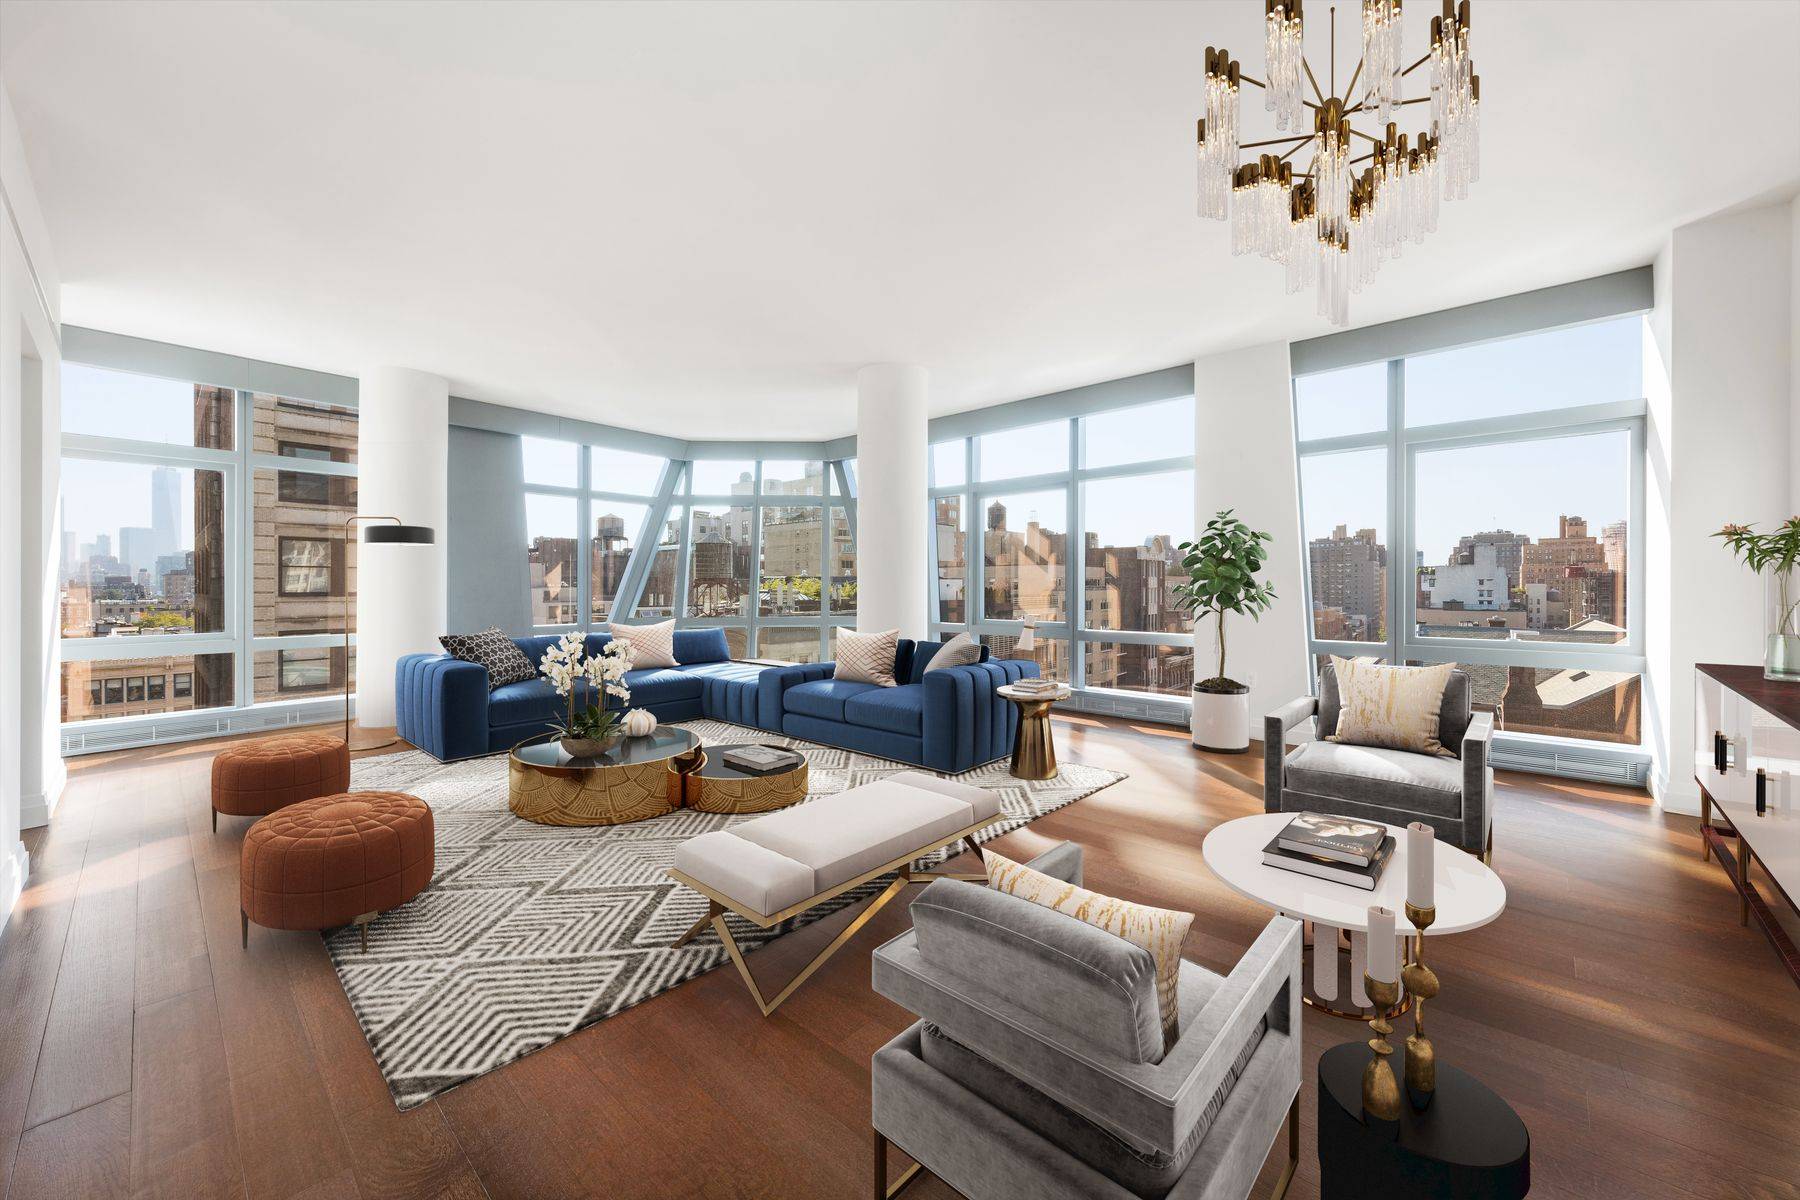 Offered for sale is a new construction four bedroom, four and a half bathroom condominium at 35 West 15th Street, between 5th and 6th Avenues.